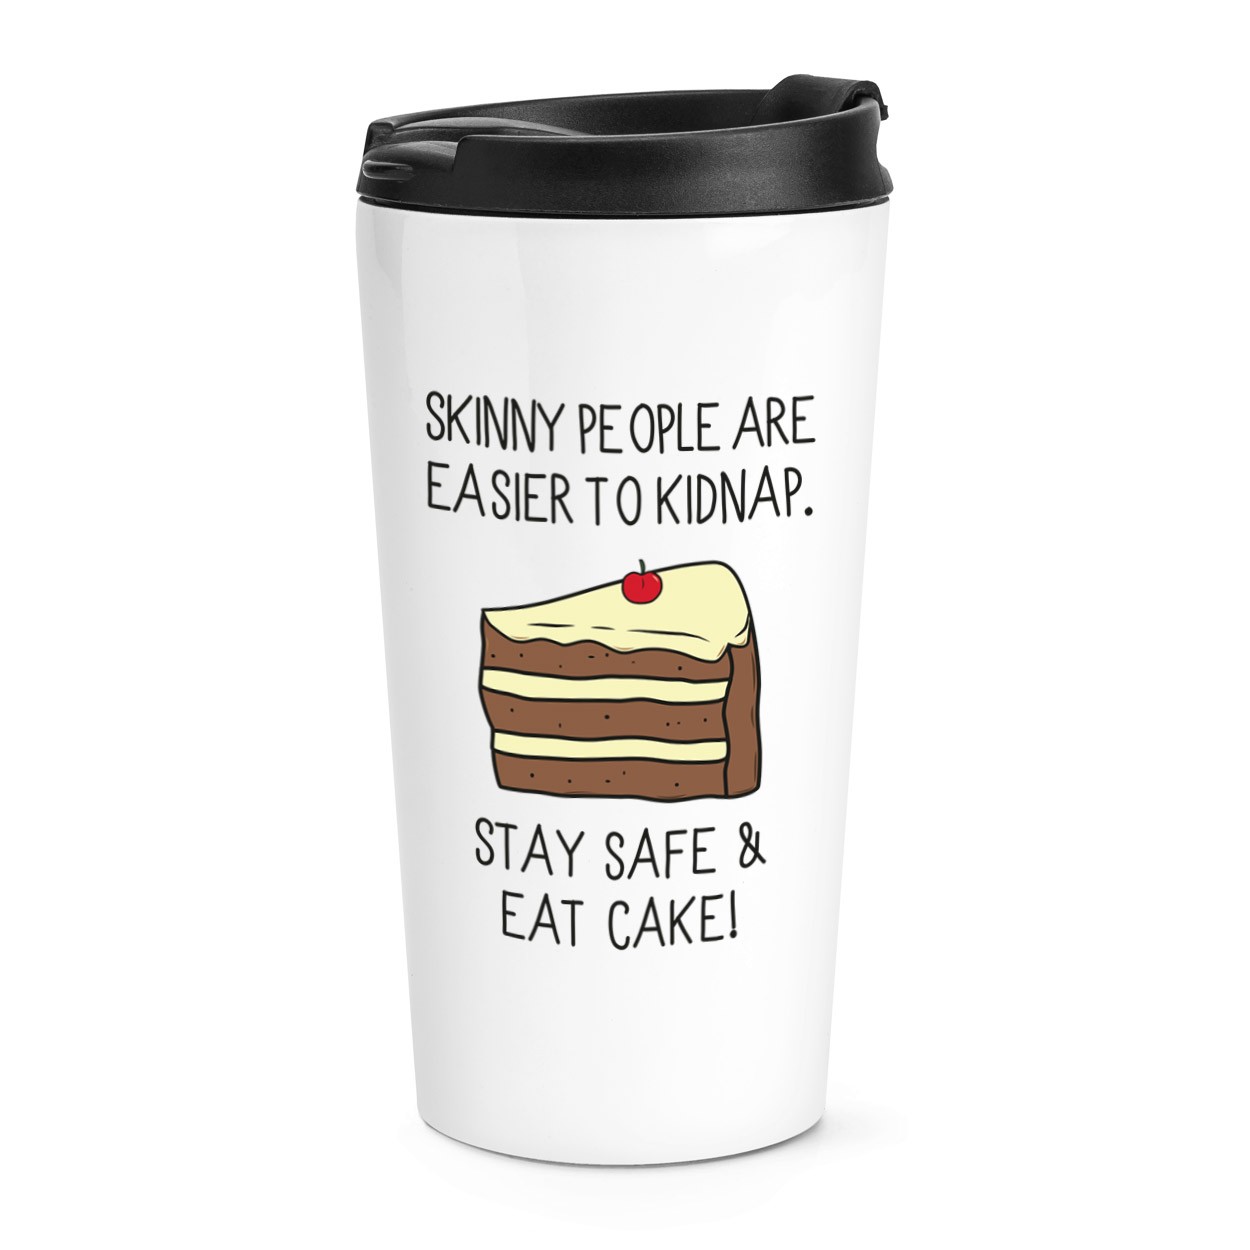 Skinny People Are Easier To Kidnap Stay Safe & Eat Cake Travel Mug Cup